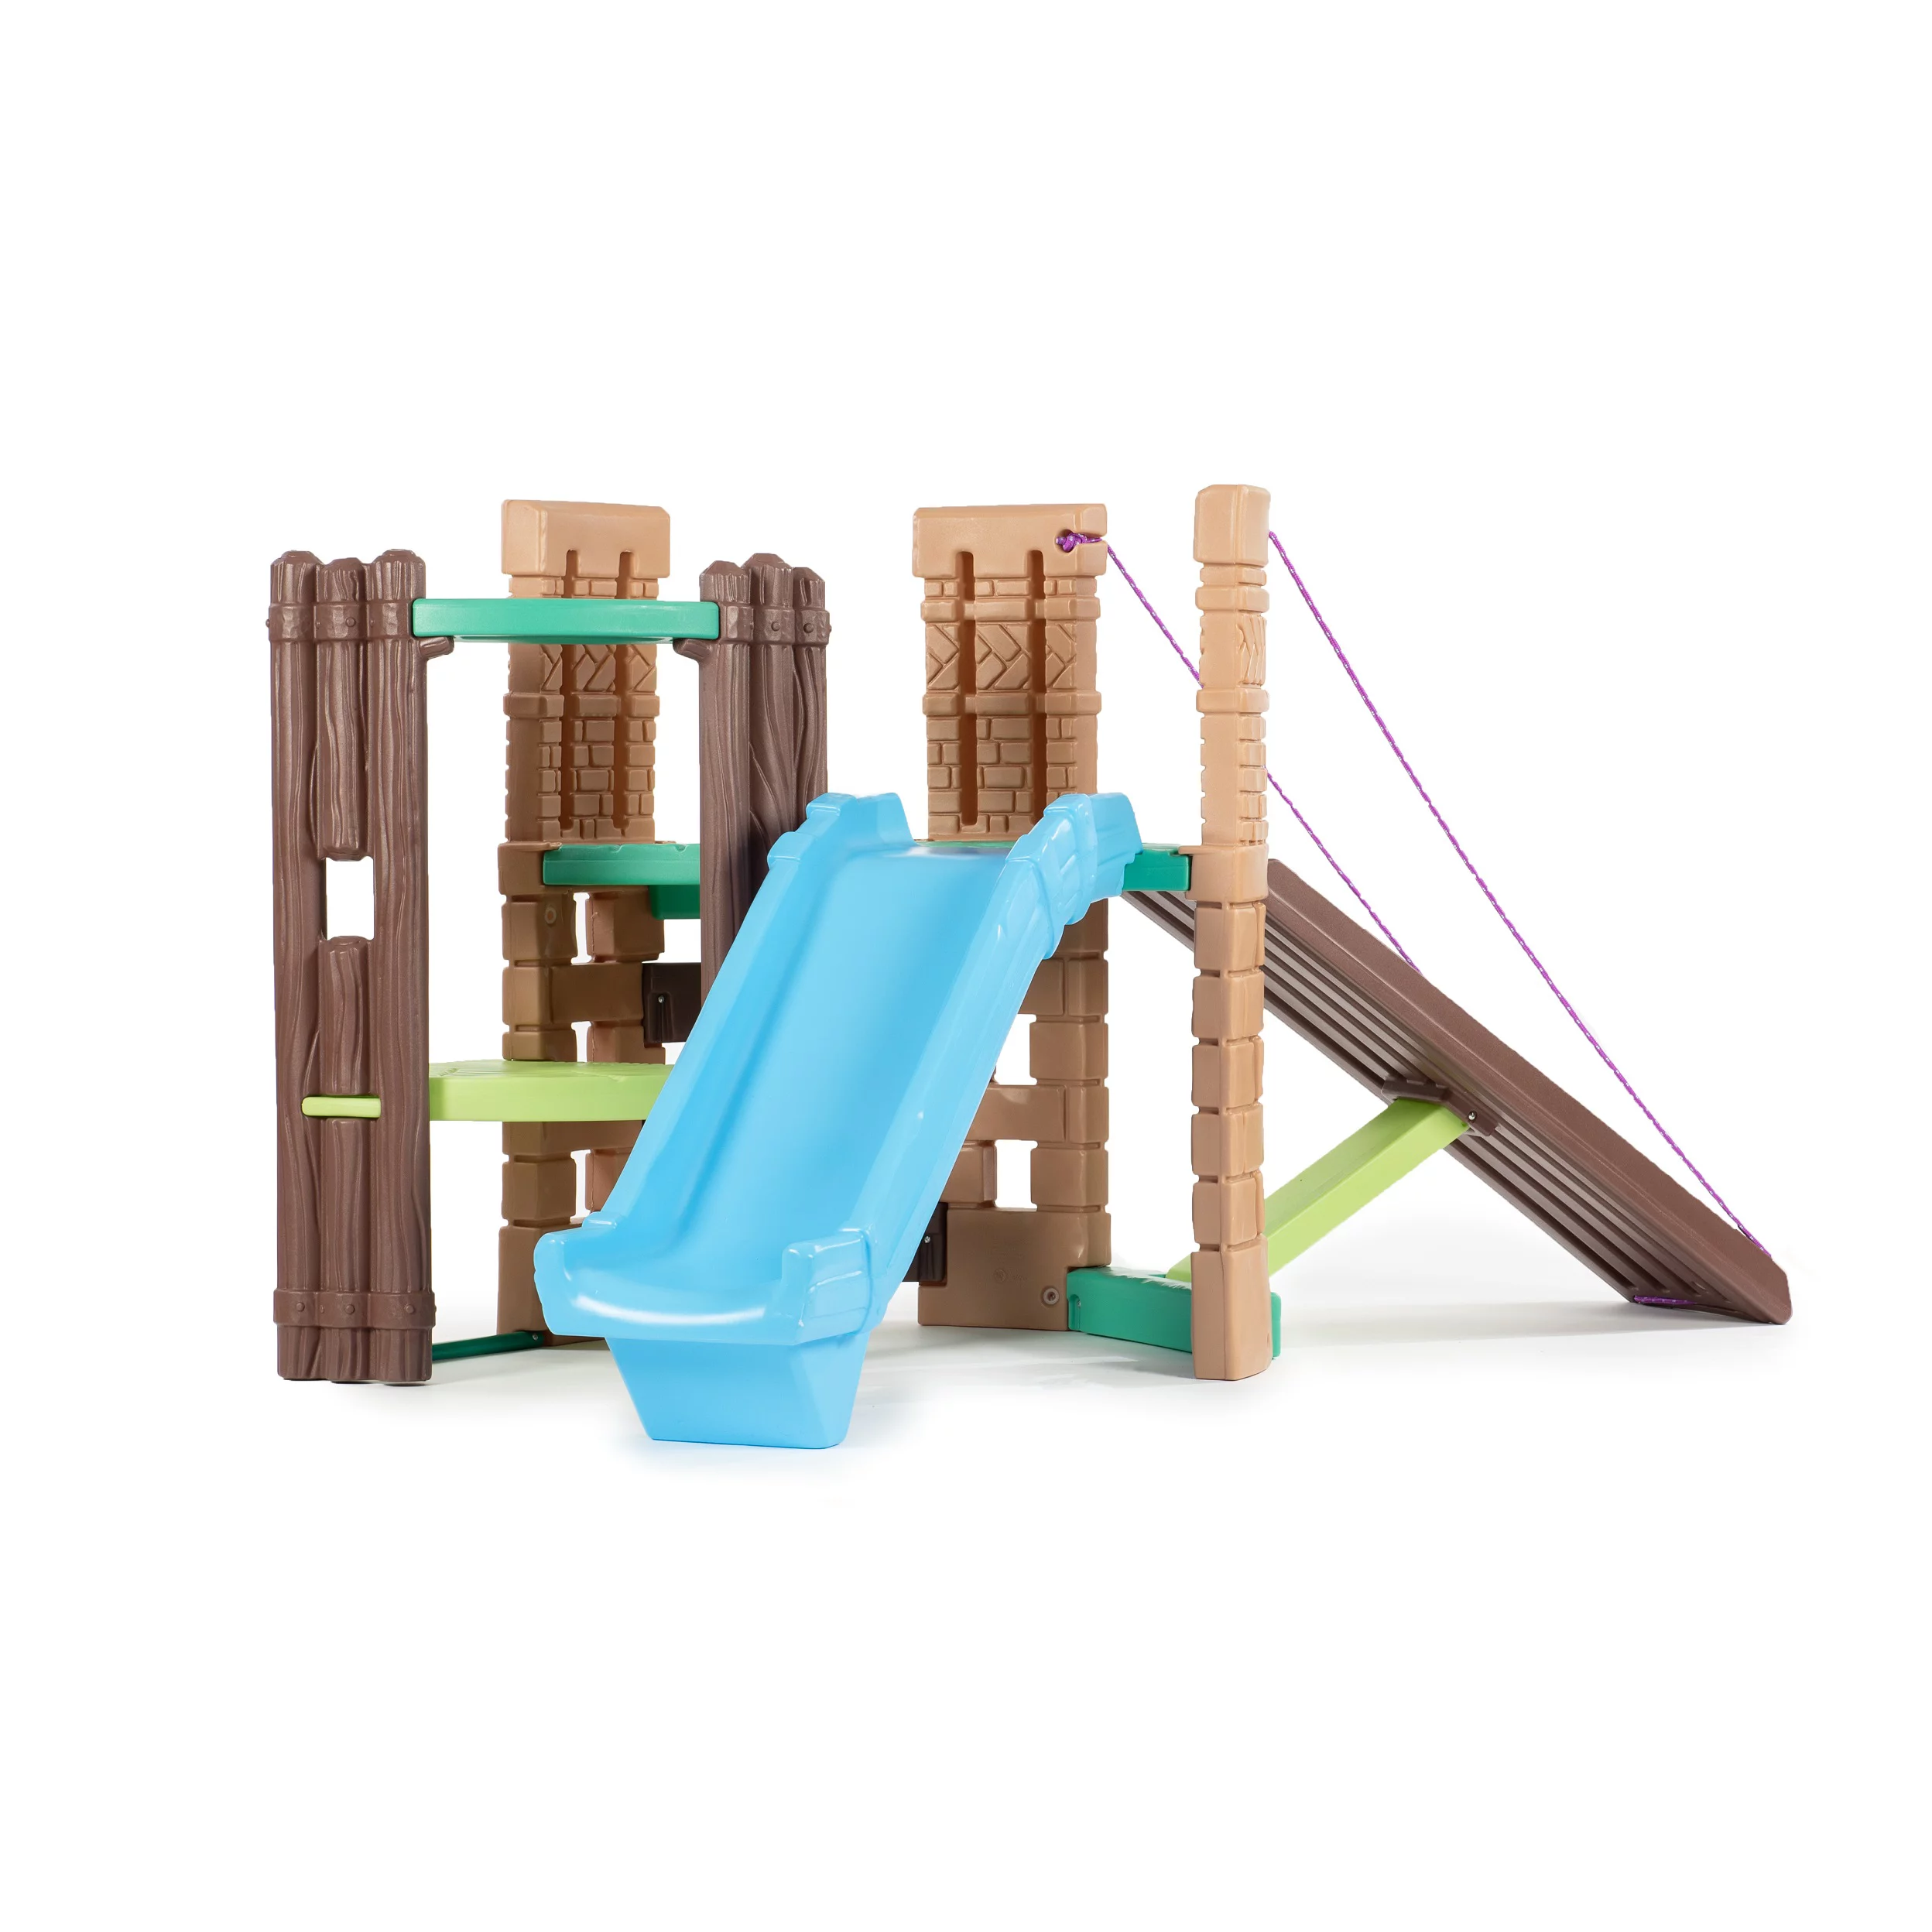 Little Tikes 2-in-1 Castle Climber and Slide